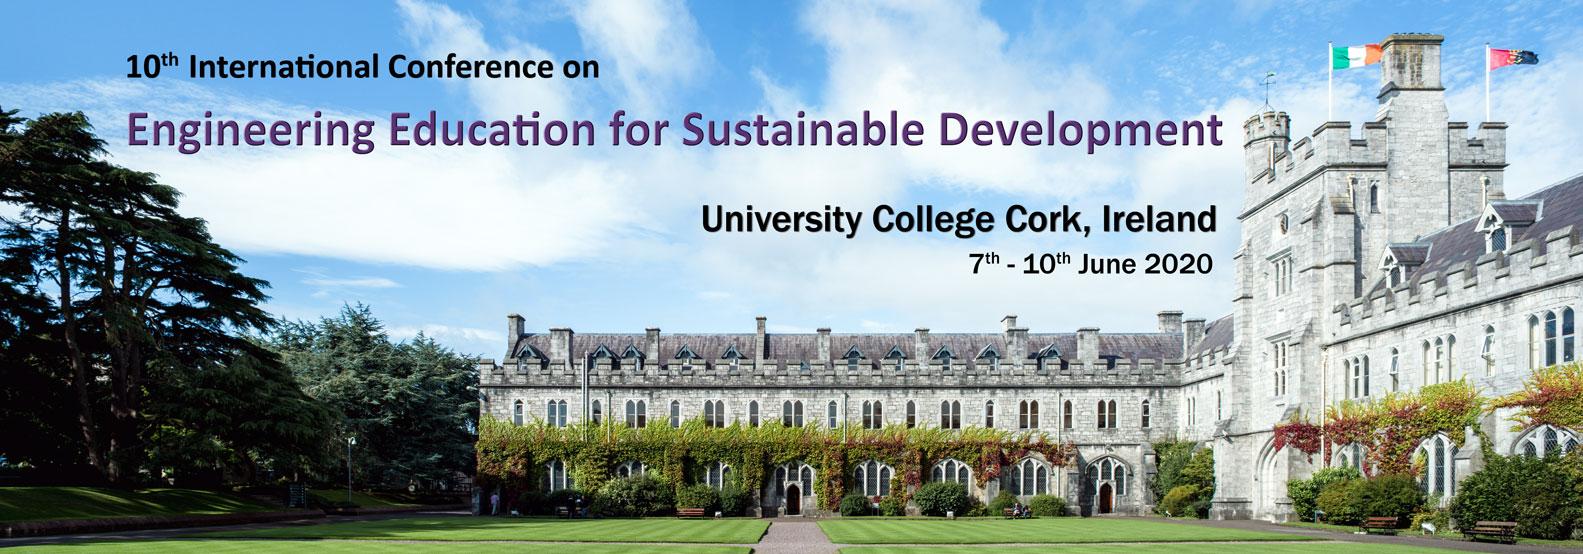 Engineering Education for Sustainable Development Conference 2020